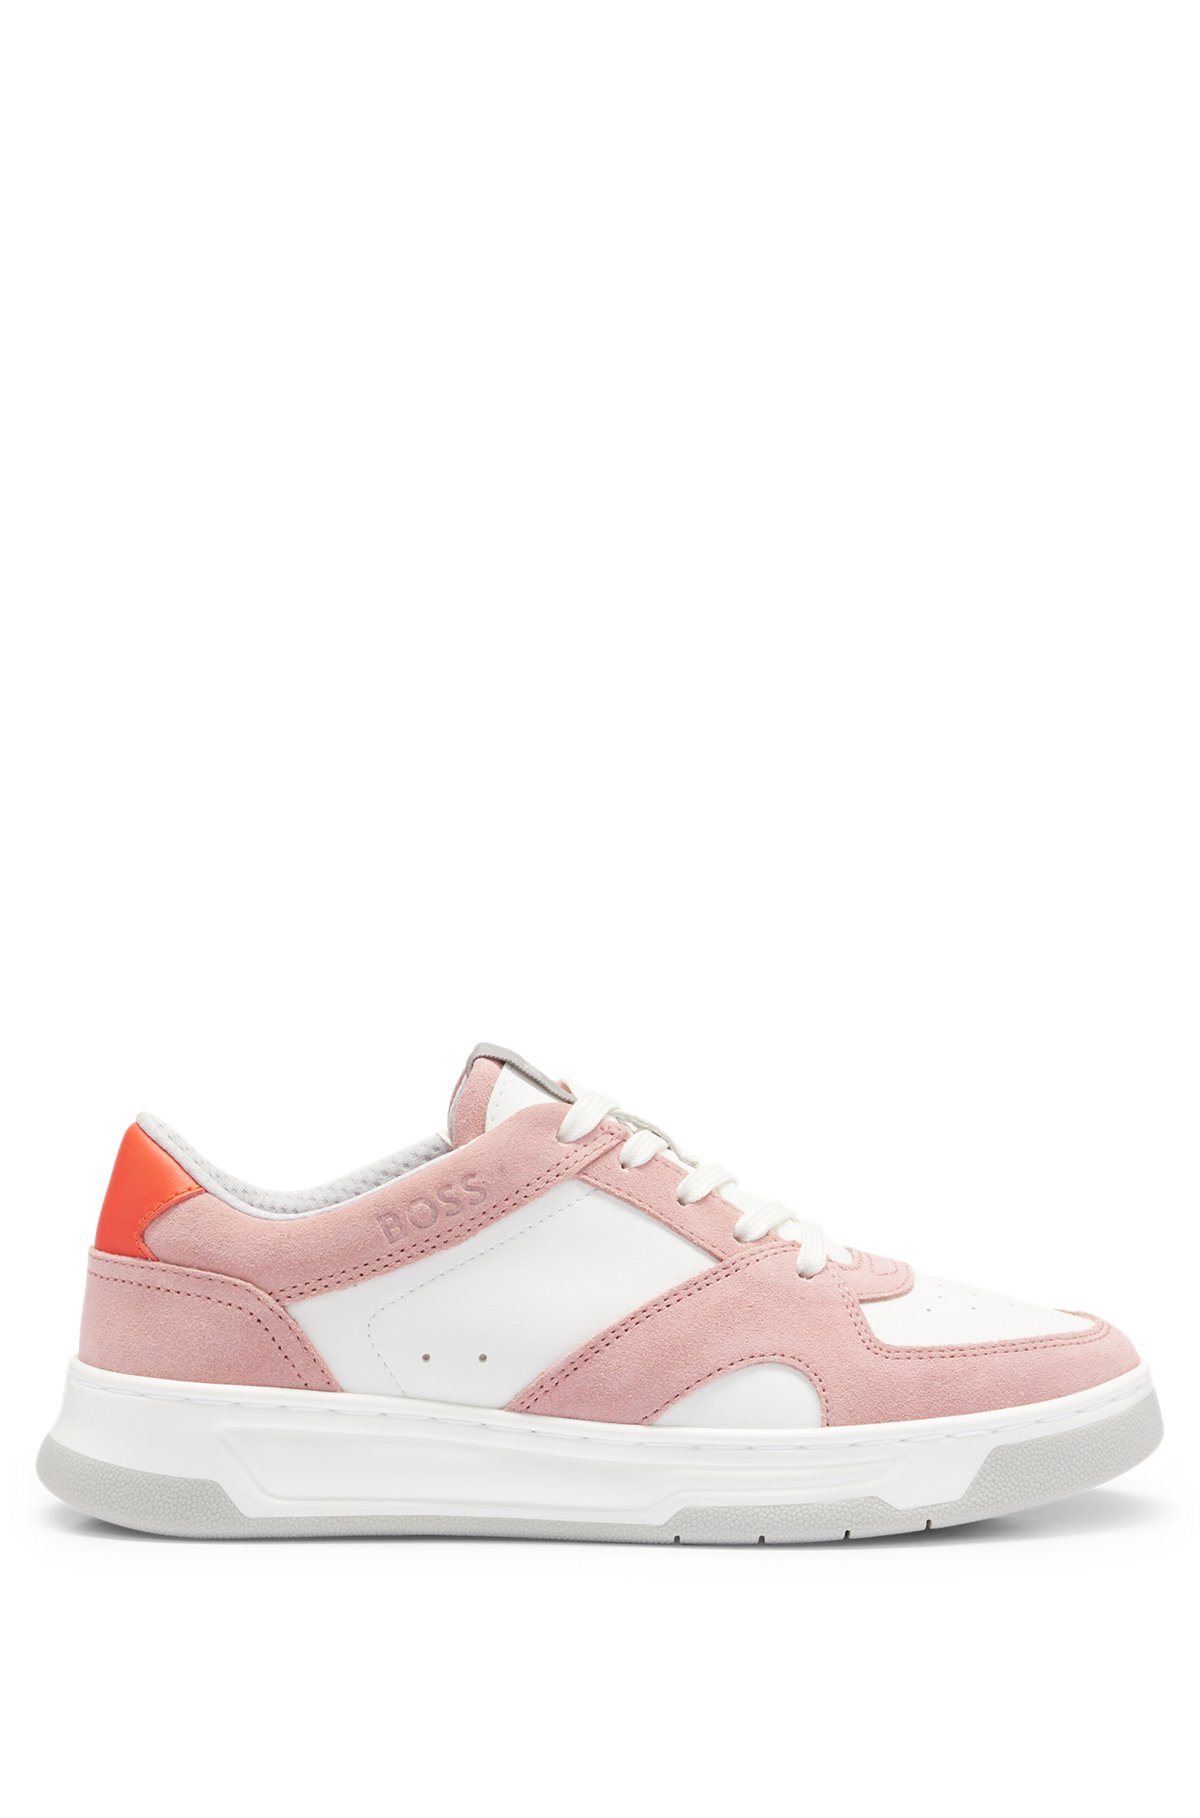 Basketball-style trainers in mixed materials with branded accents, light pink